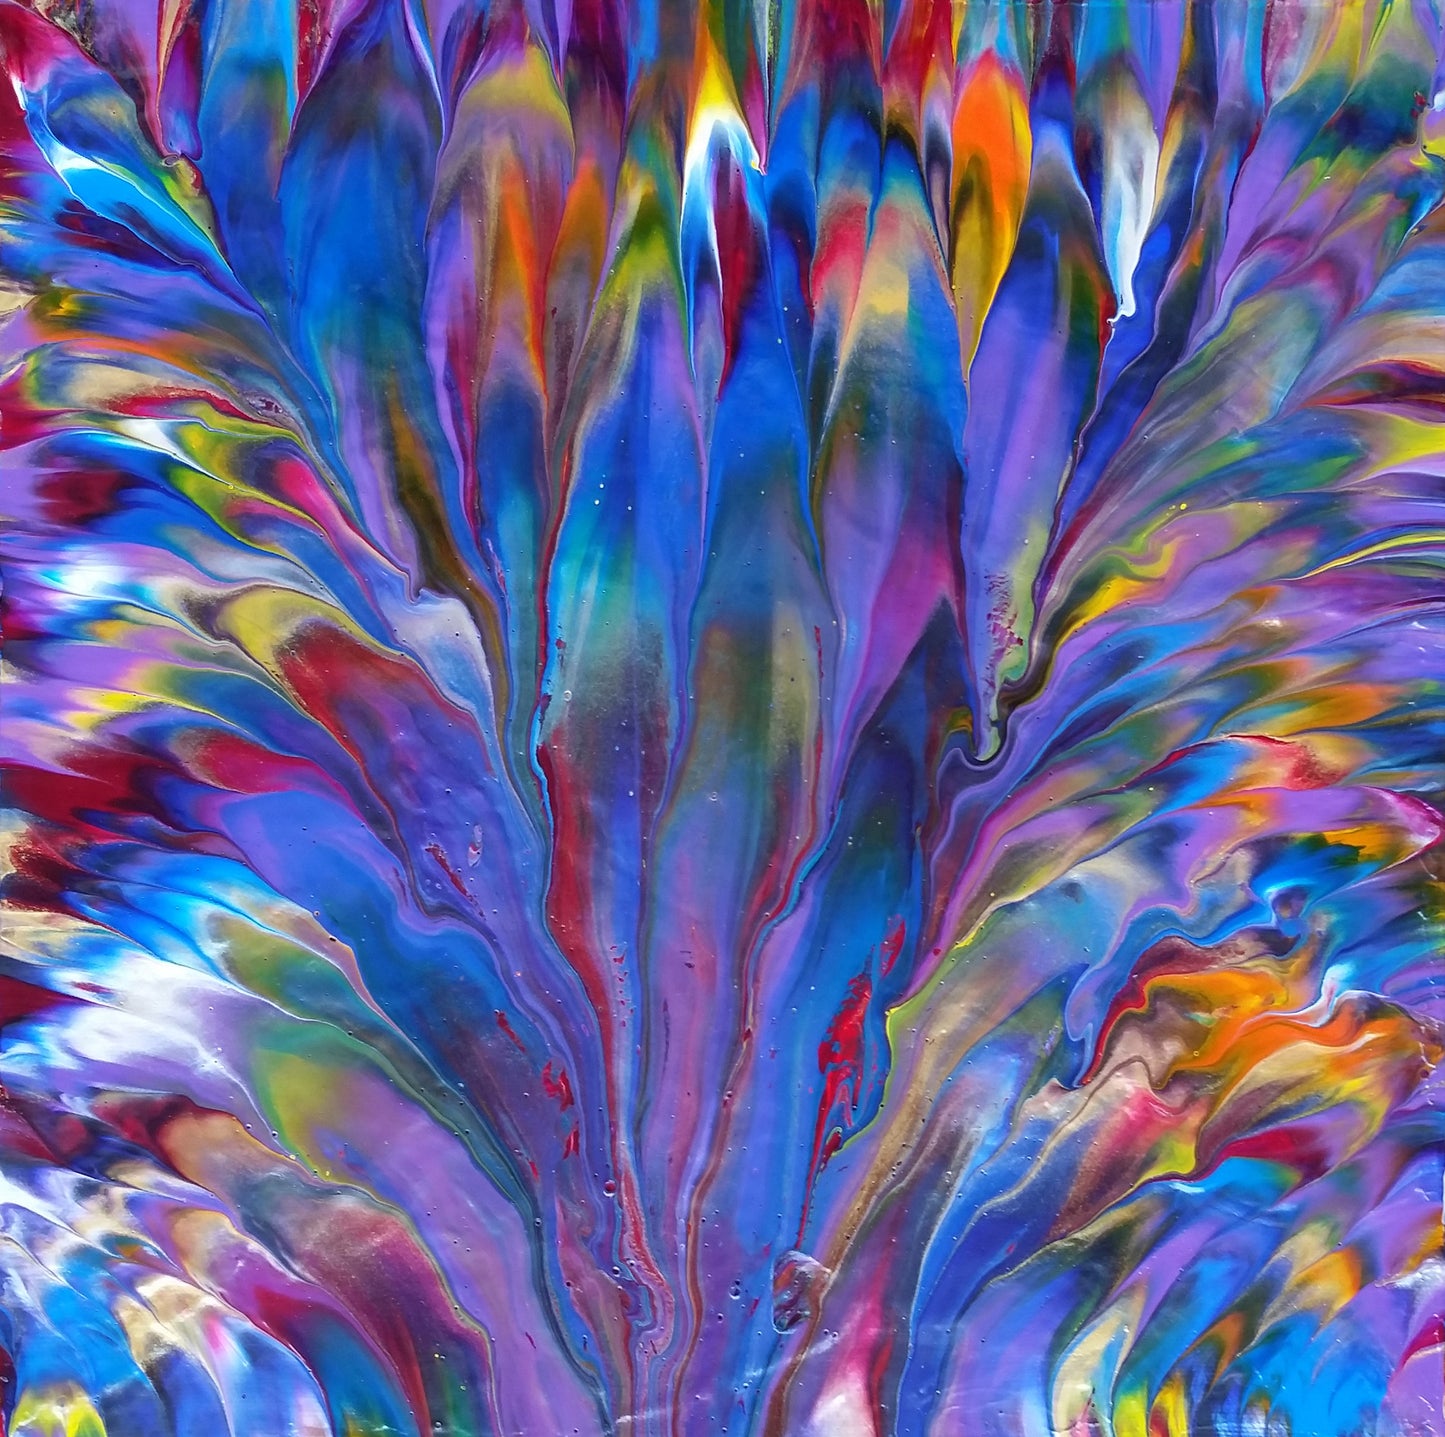 Iridescent Garden Abstract Fluid Painting Modern Contemporary Colorful Art